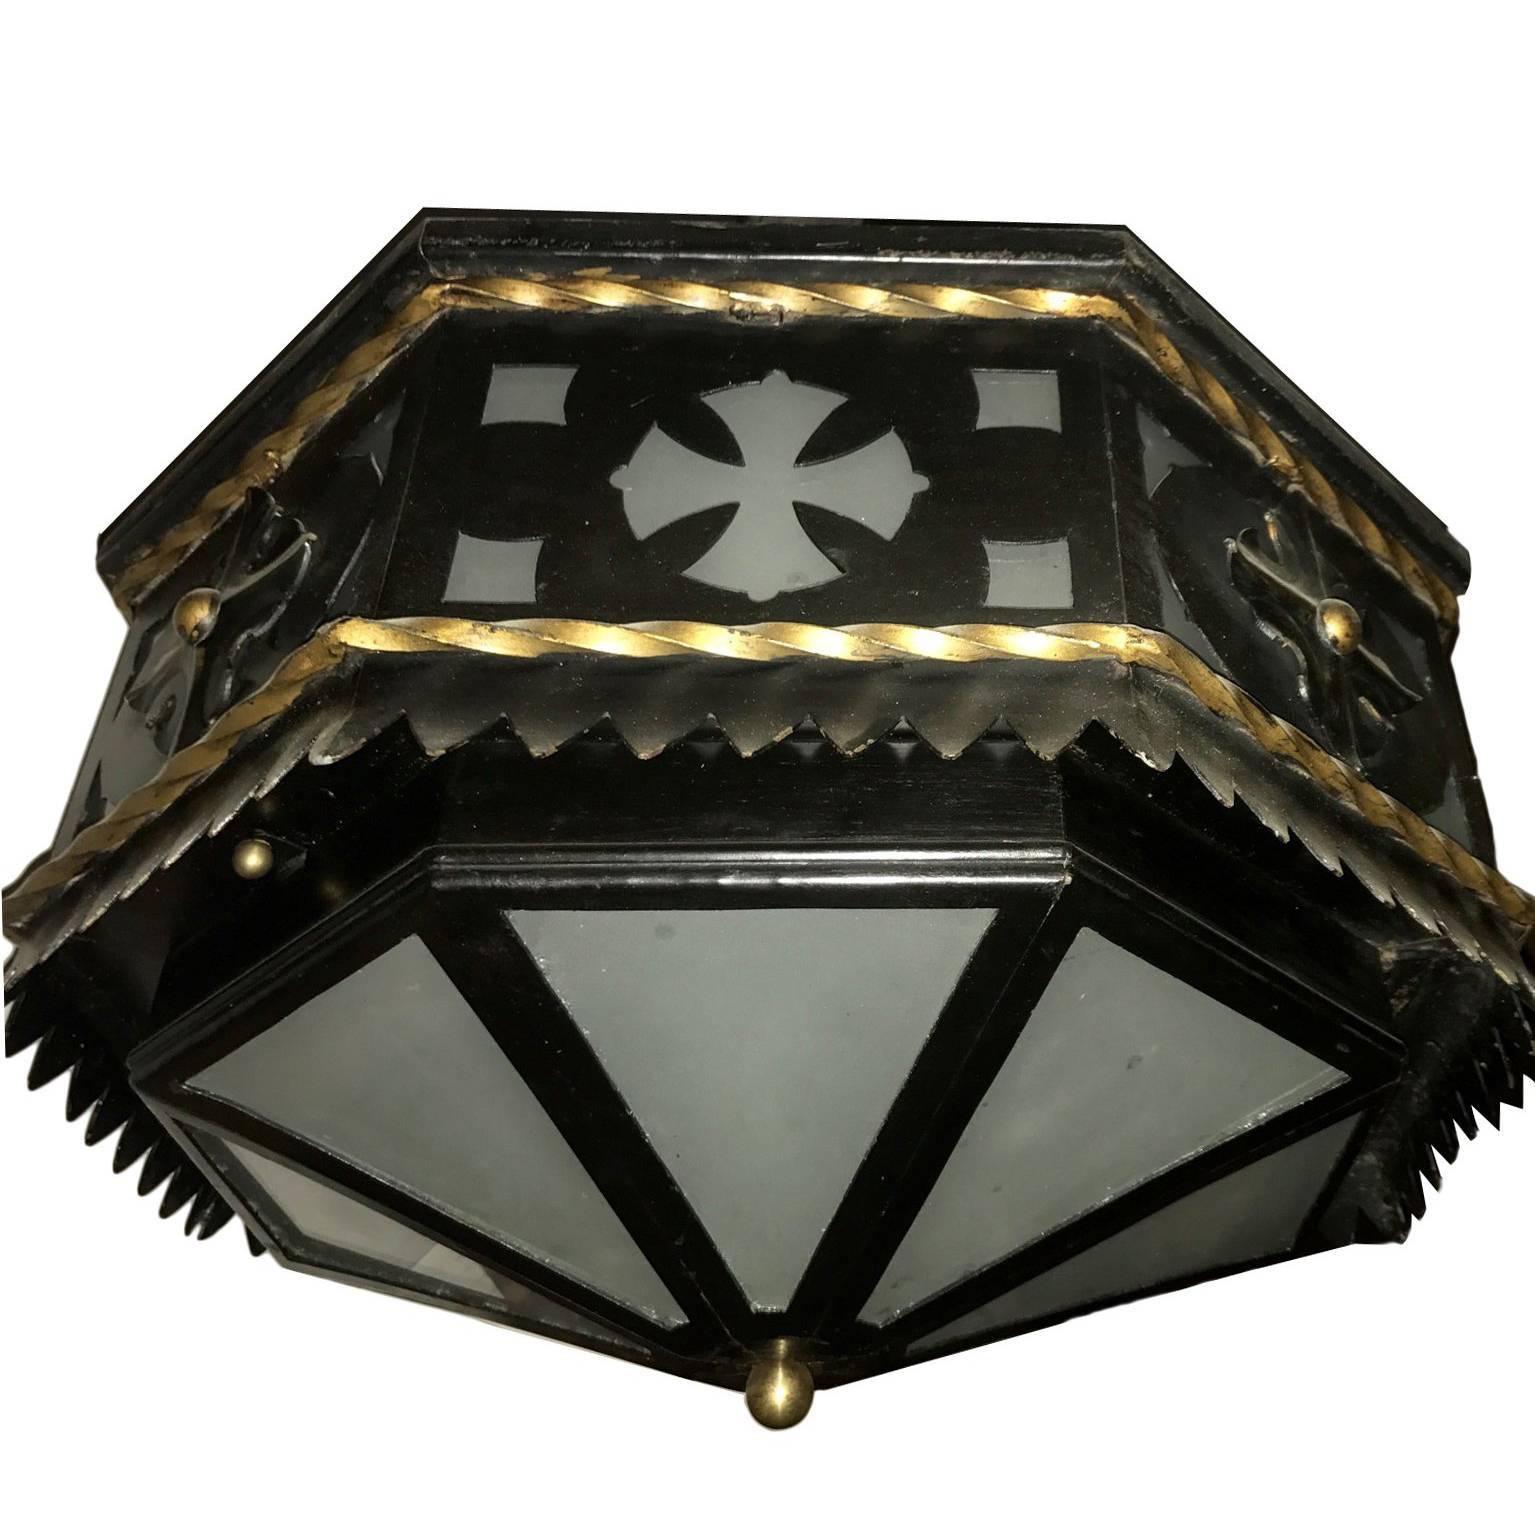 Wrought Iron Flush Mounted Light Fixture For Sale